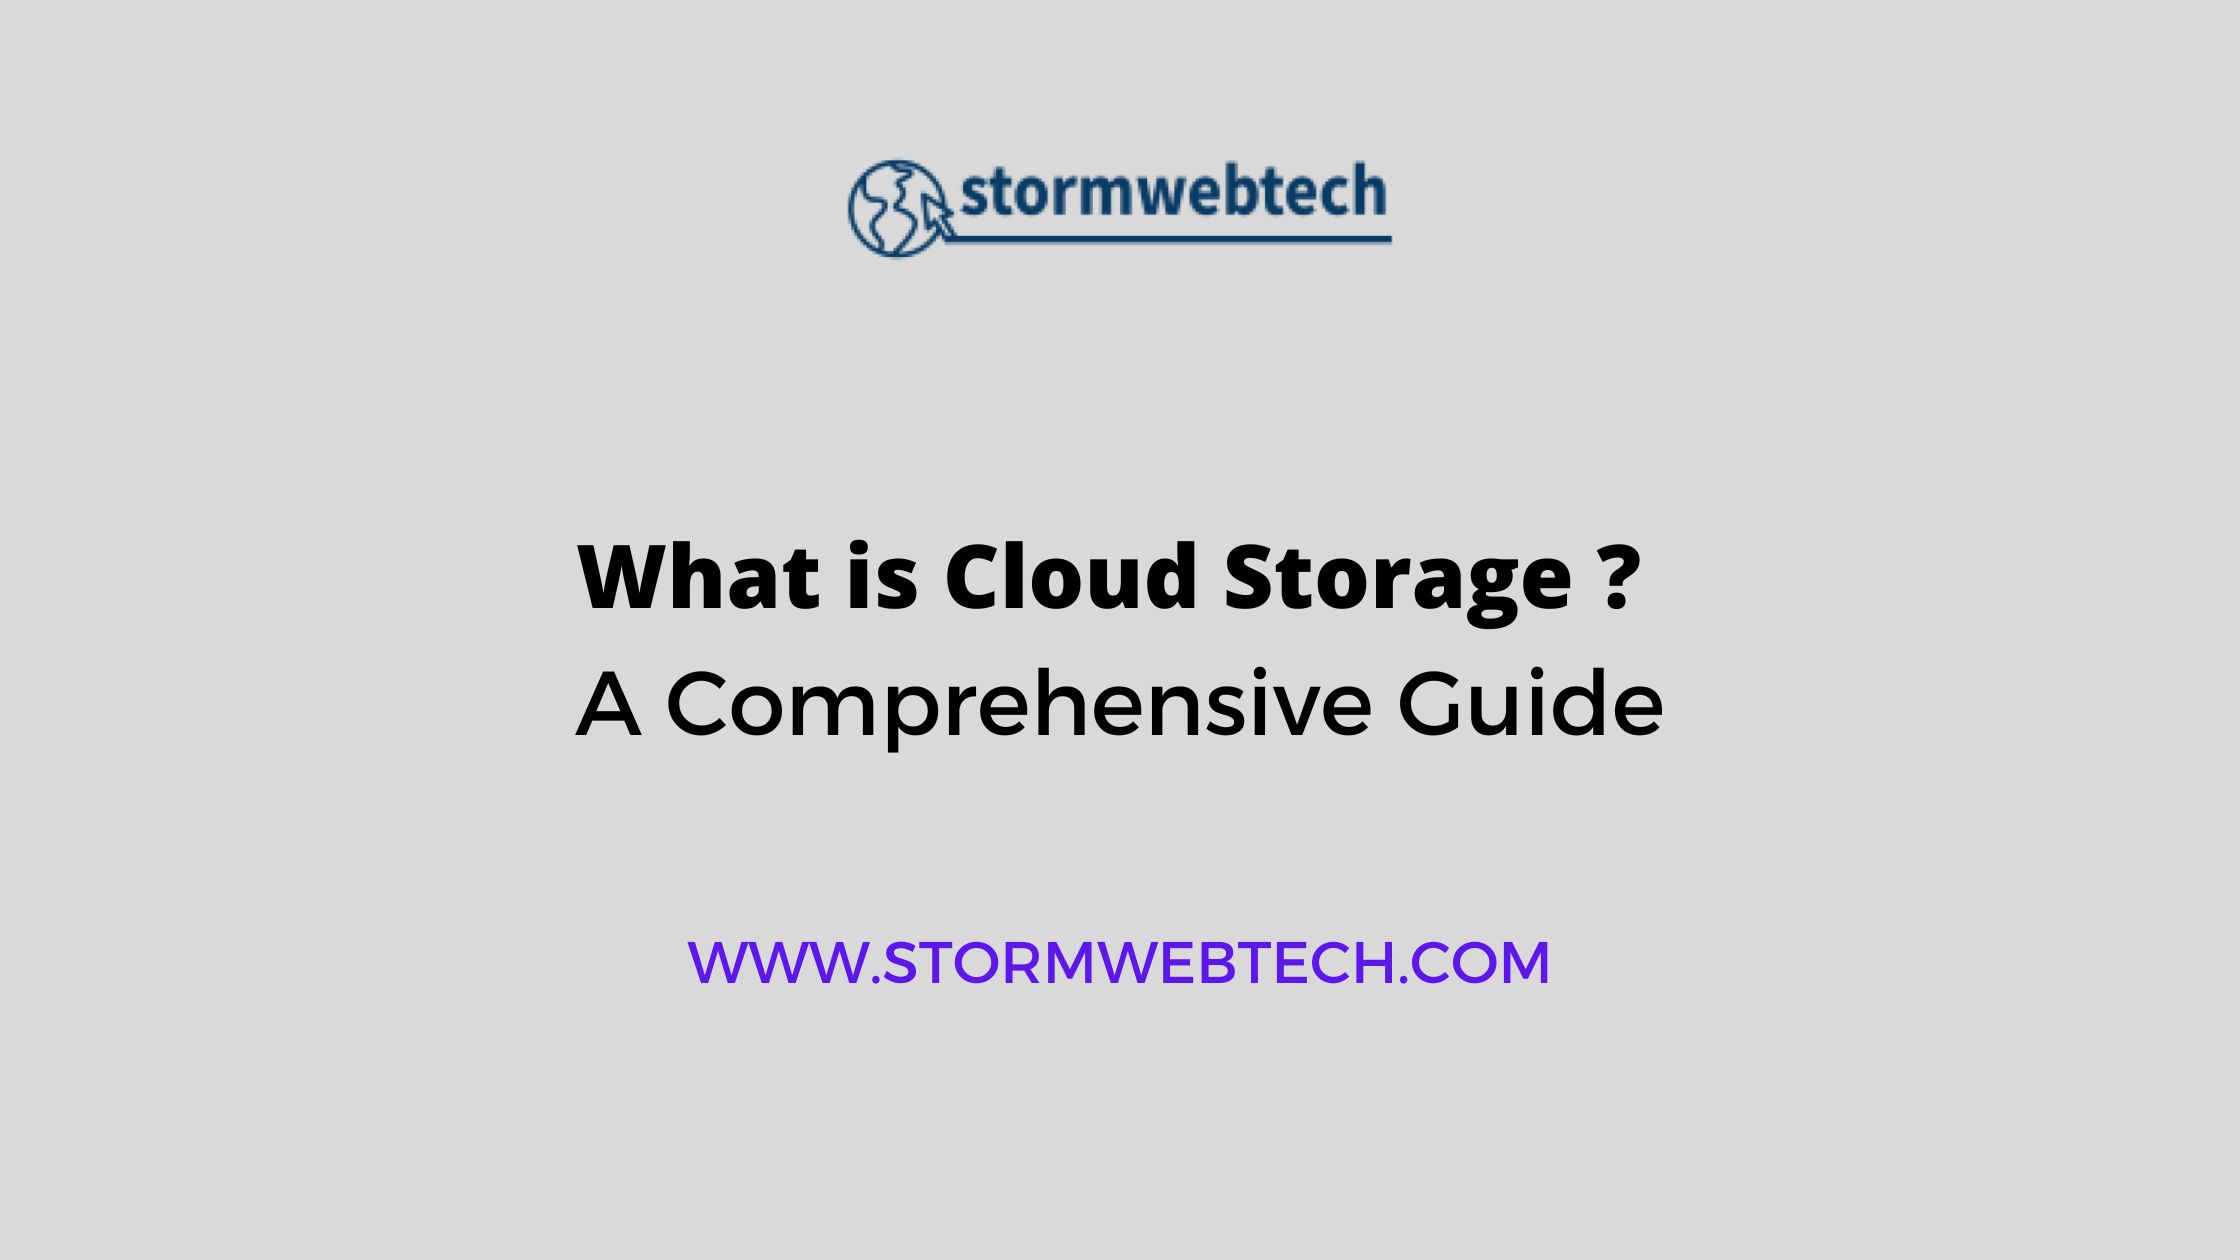 Explore the concept of cloud storage in-depth and learn how it works, its benefits. Discover how cloud storage revolutionizes data management